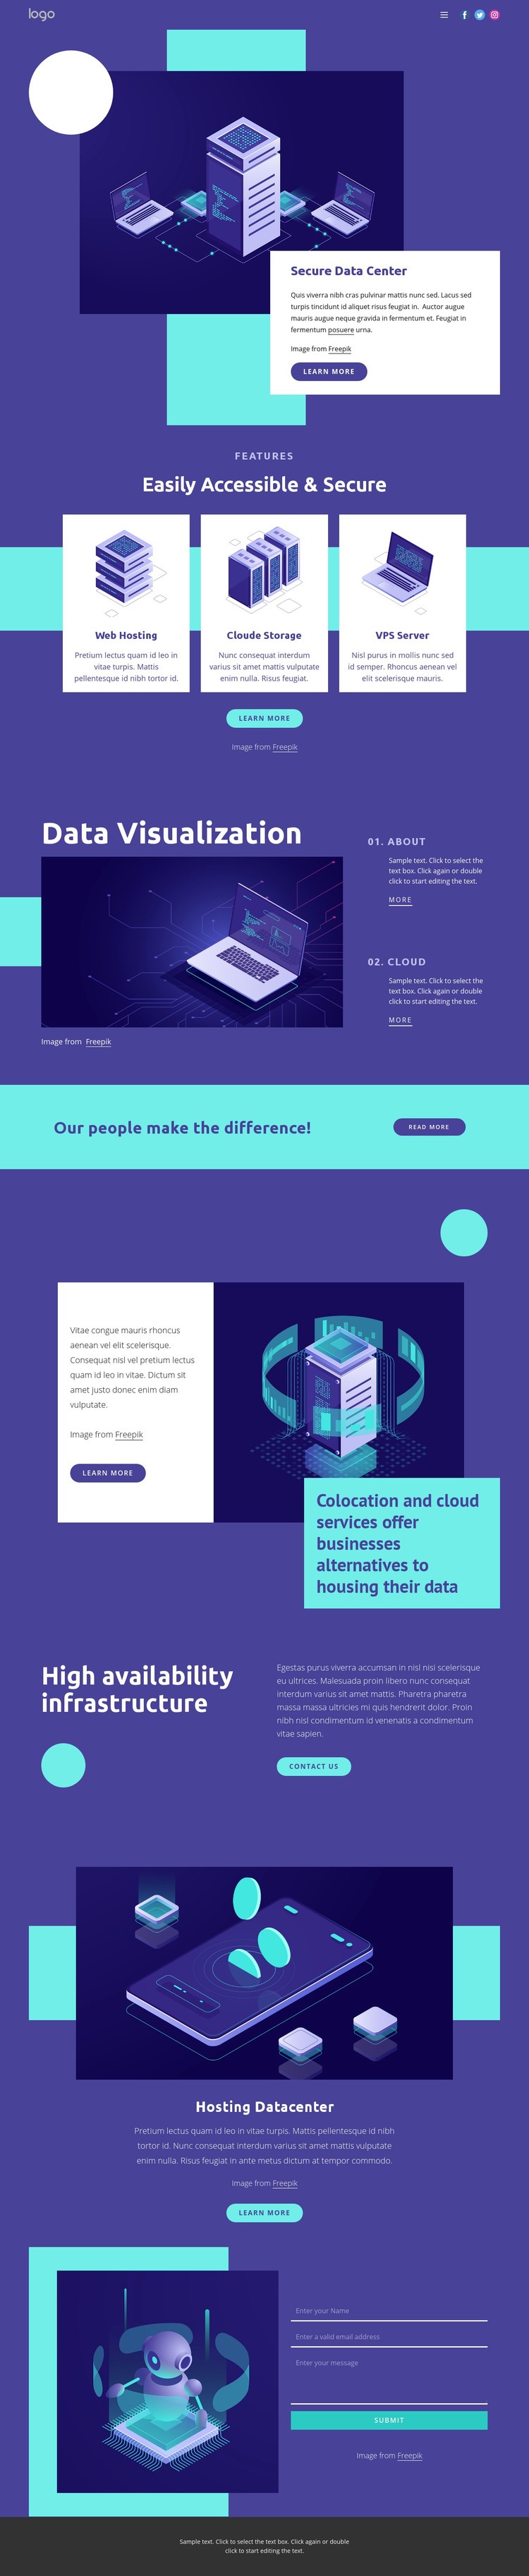 Data Center security solutions Homepage Design